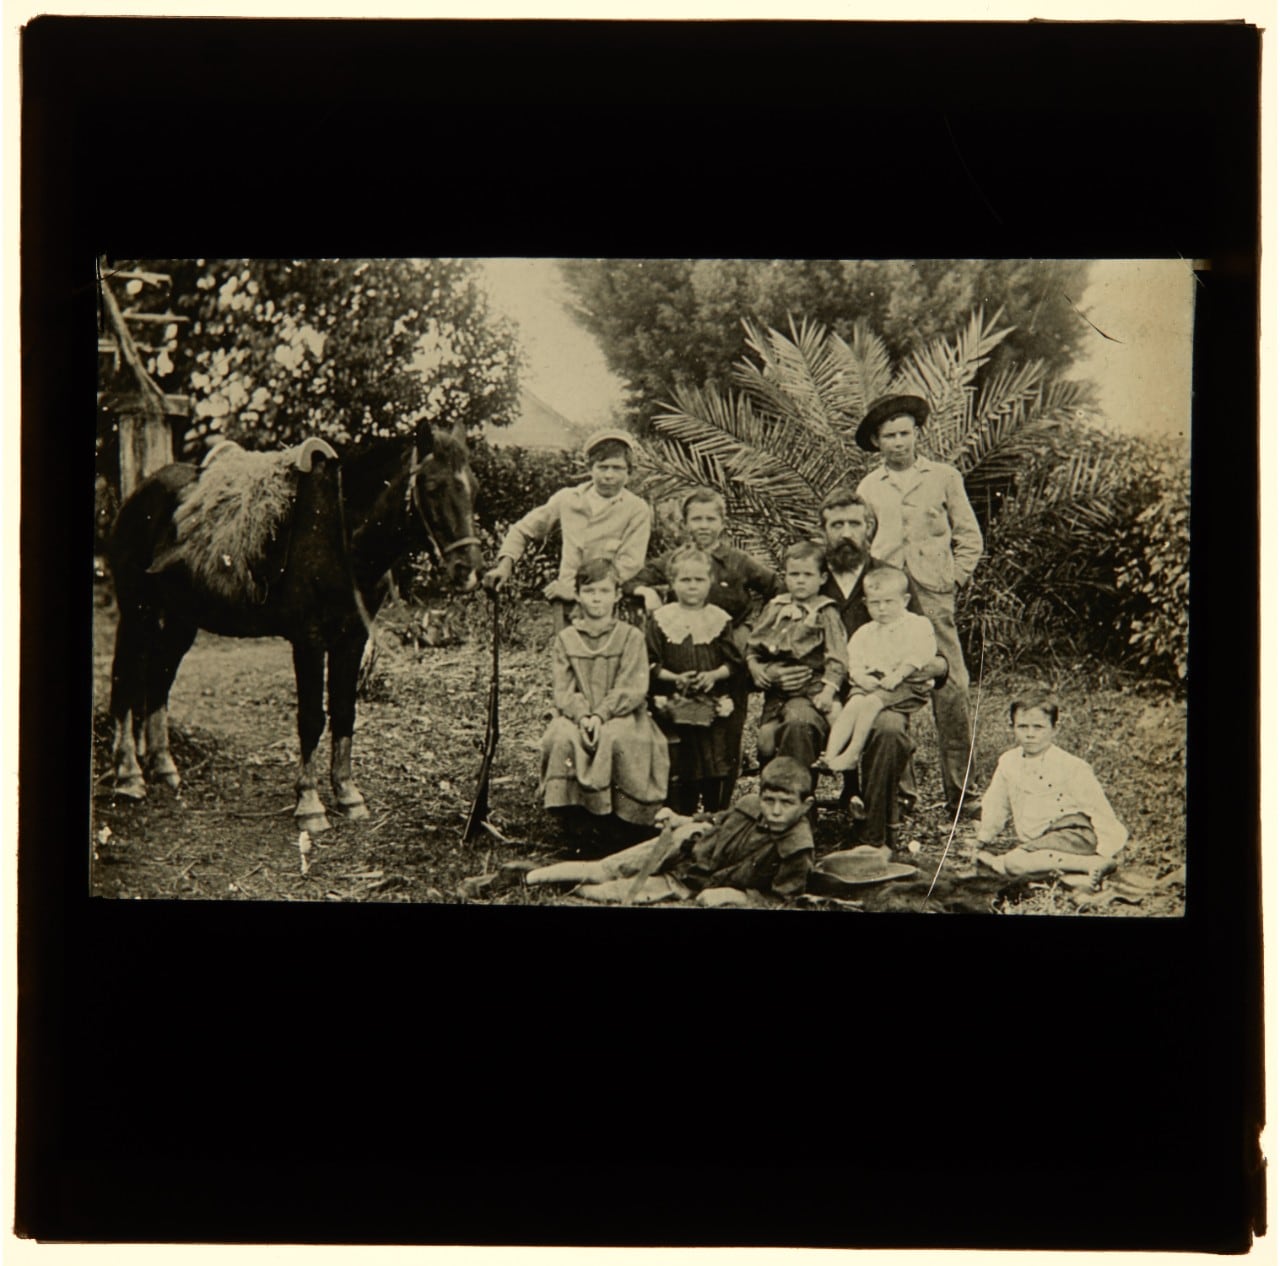 A black-and-white photograph of children and a horse